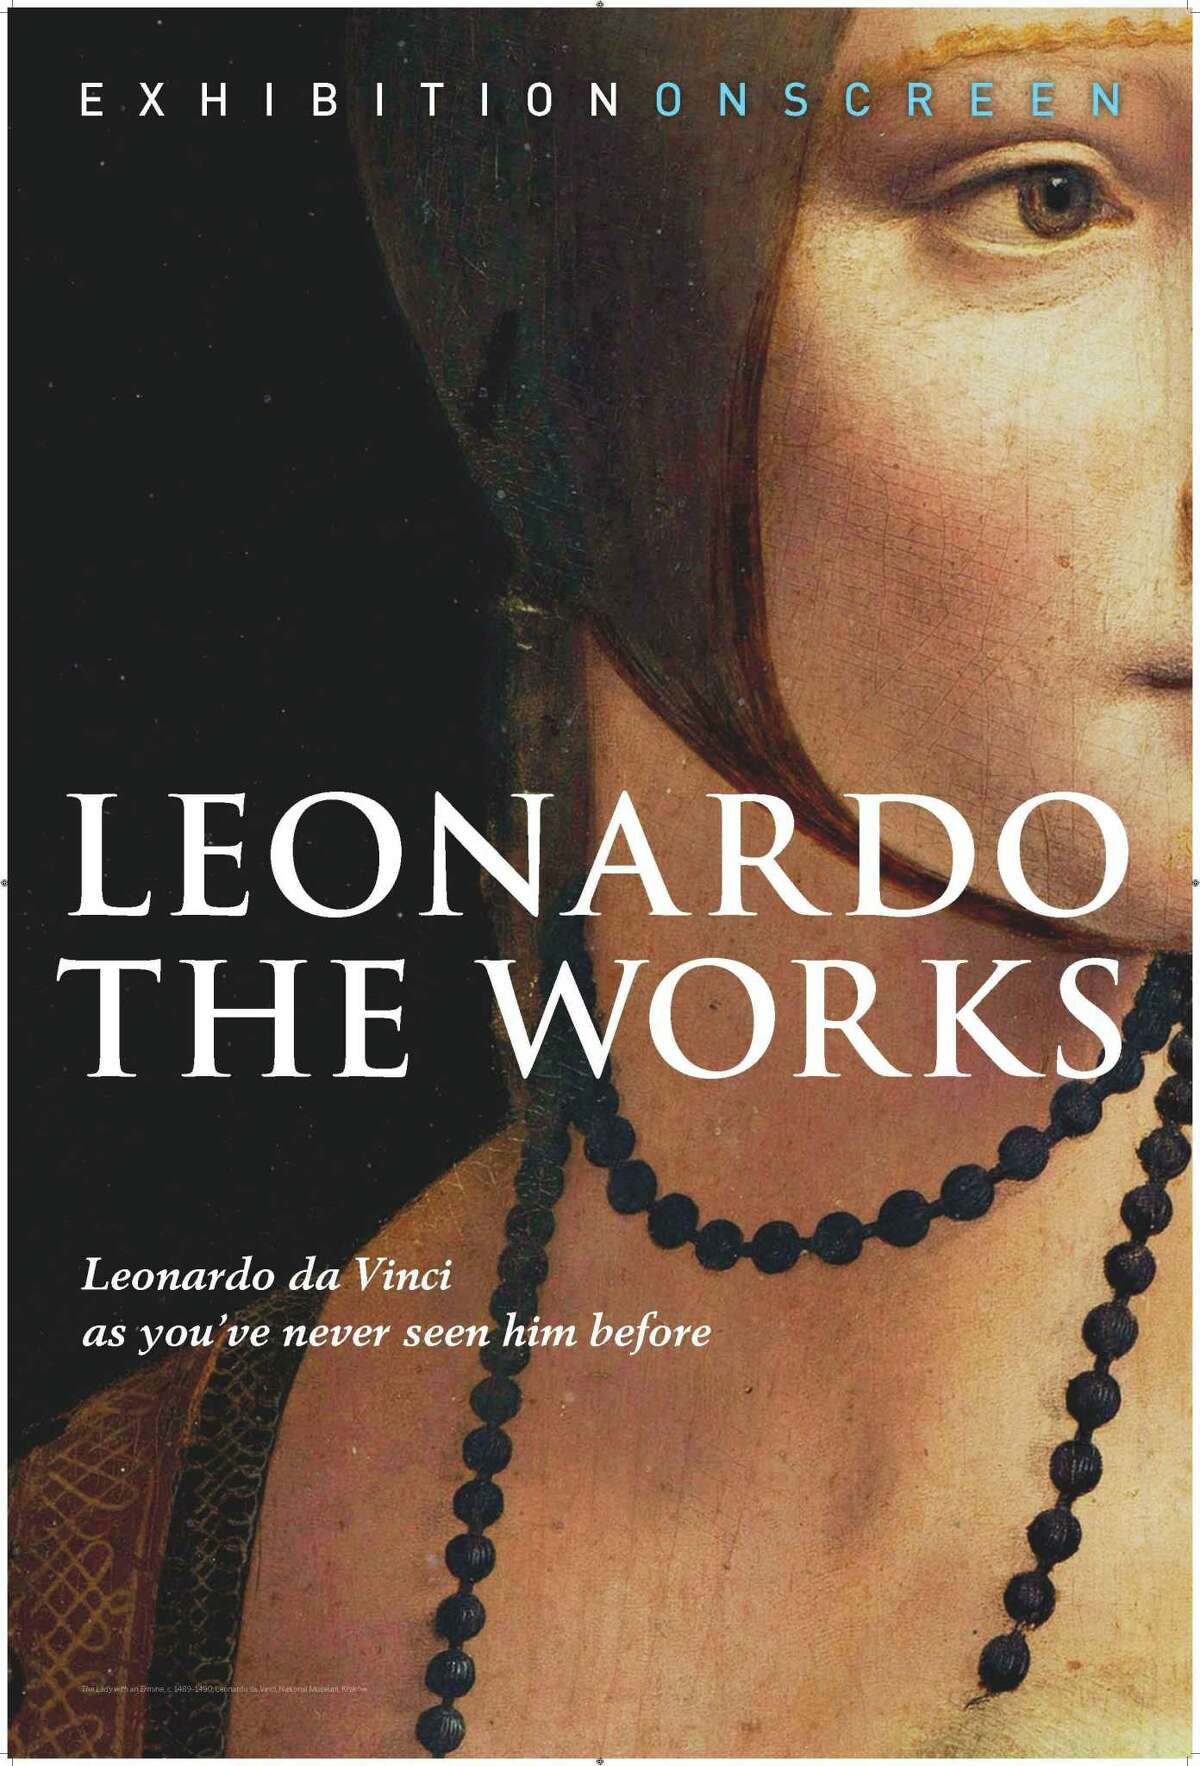 Exhibition on Screen, the award-winning cinematic series that explores the biographies of history’s most revered artists, continues at Stamford’s Avon Theatre with screenings of “Leonardo: The Works” on October 30 and November 2.